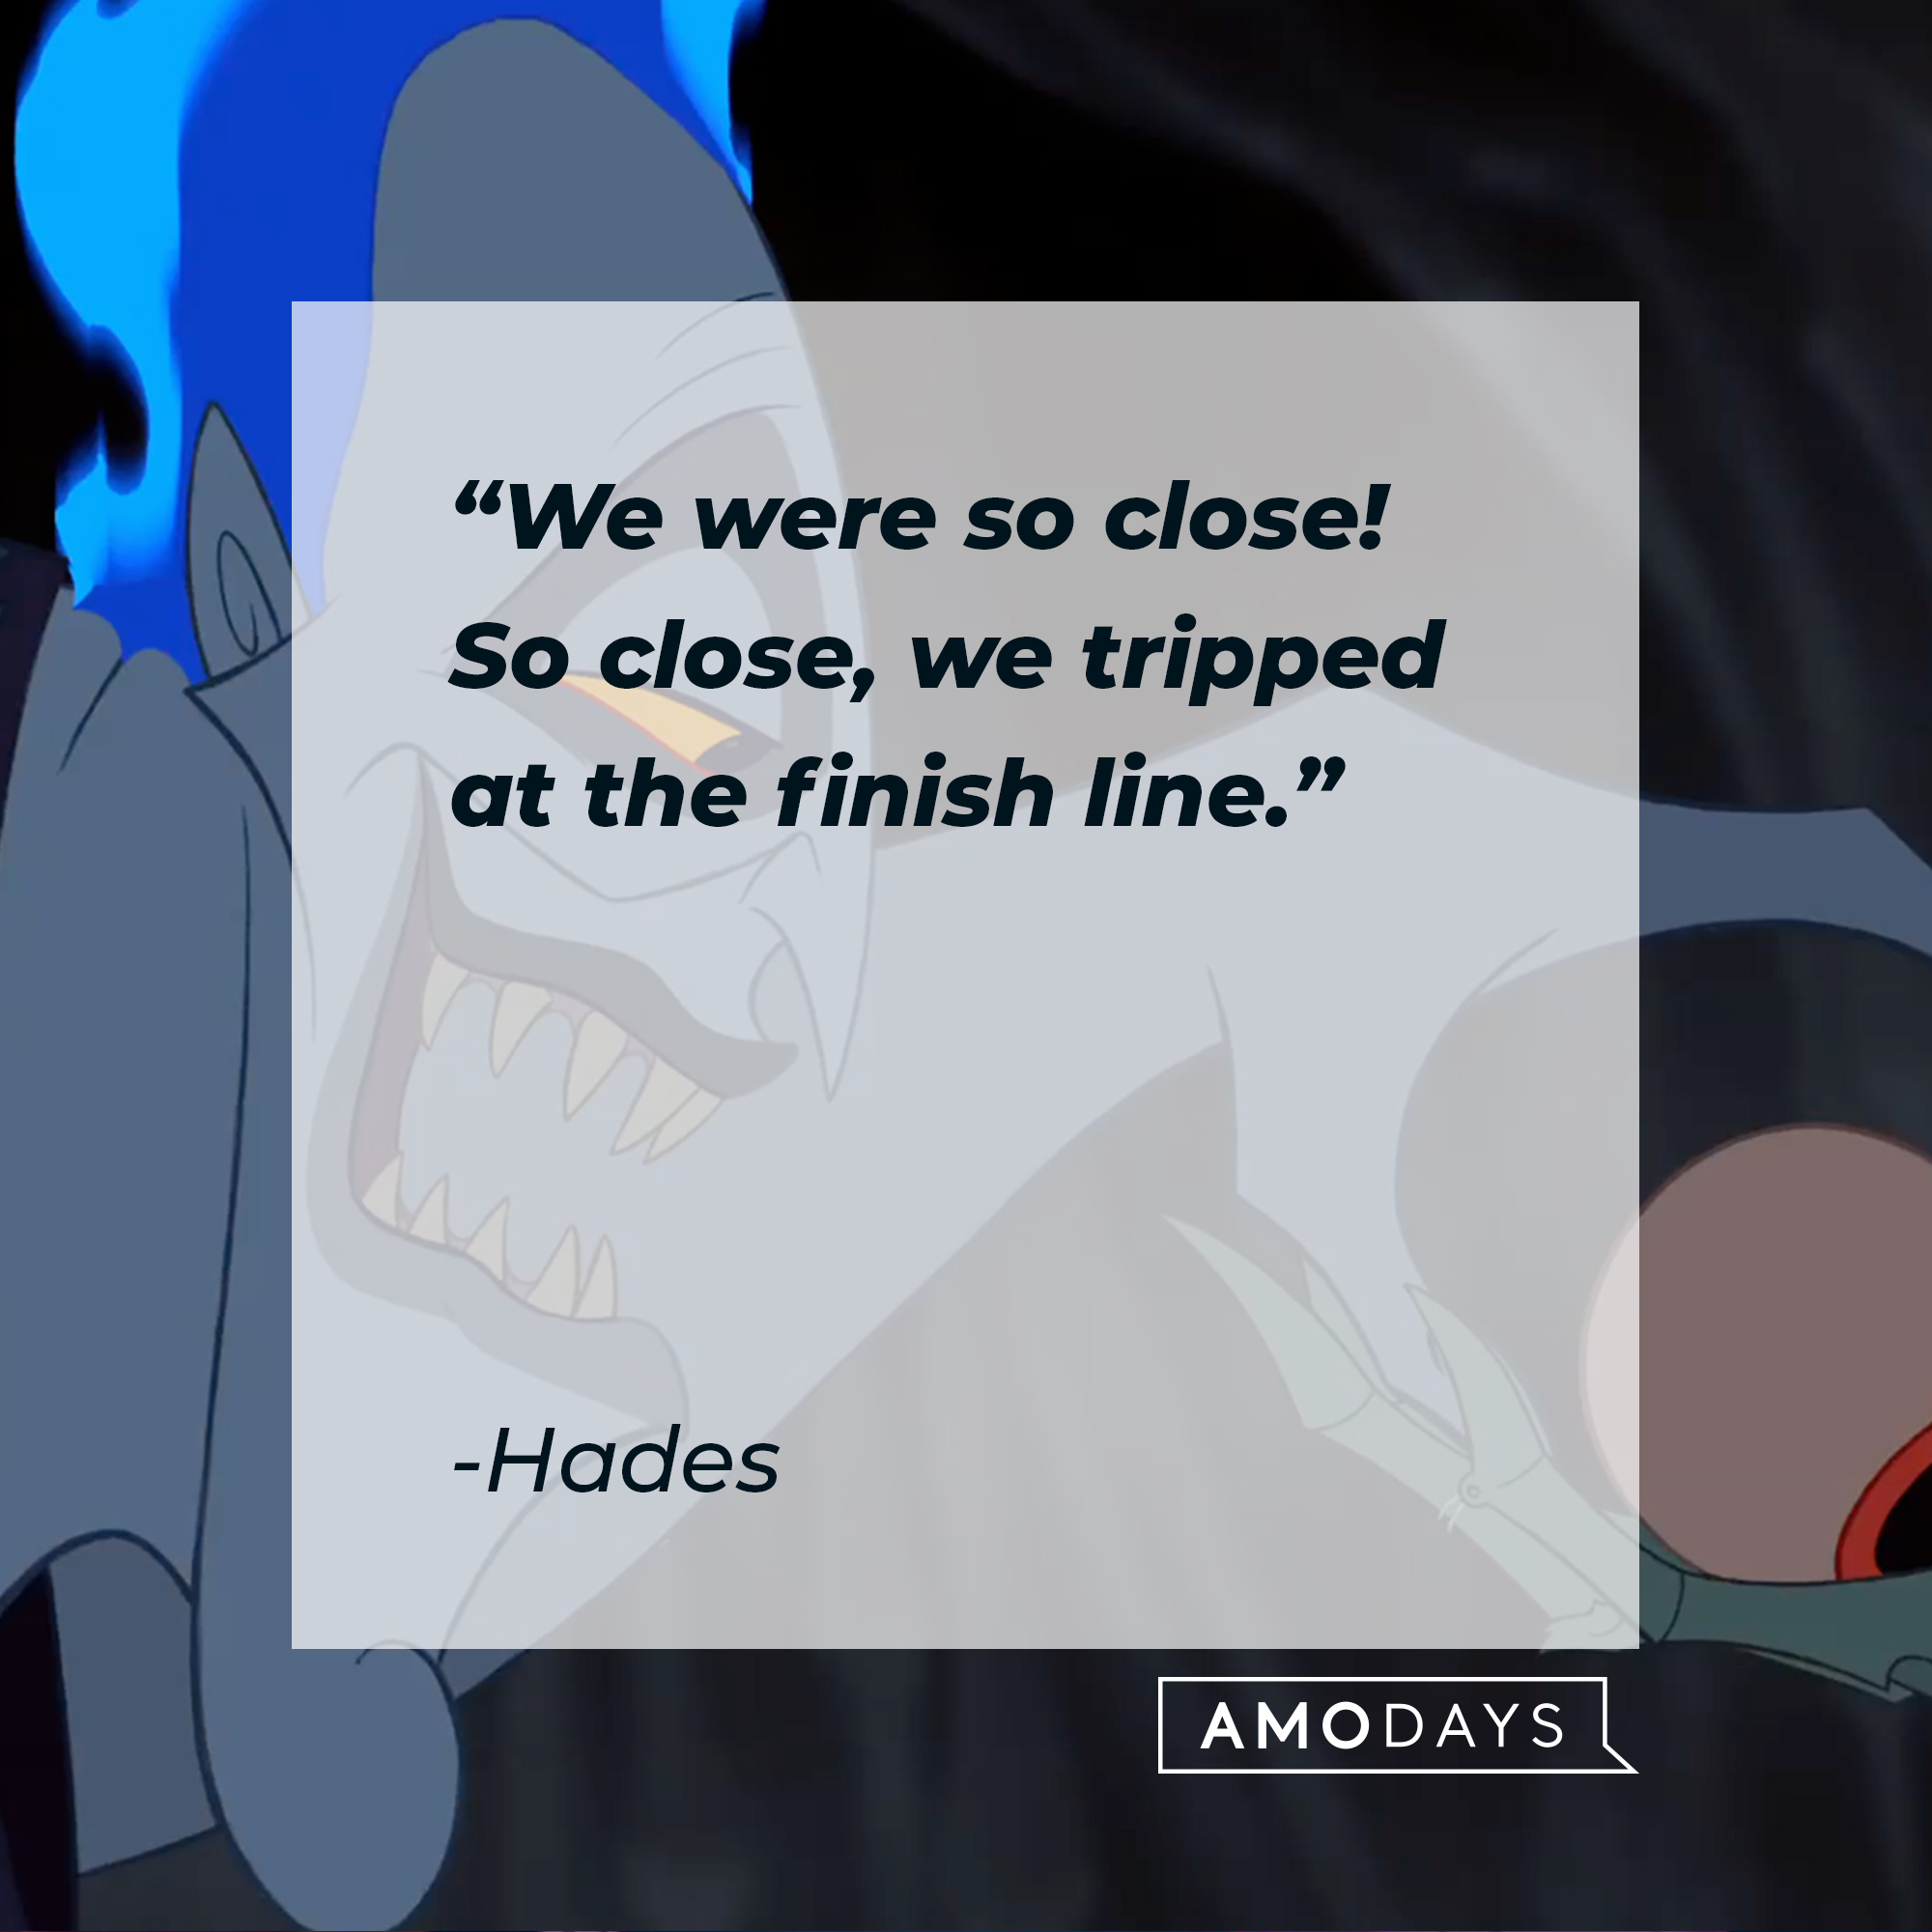 Hades from the "Hercules" movie with his quote: “We were so close! So close, we tripped at the finish line.” | Source: Facebook.com/DisneyHercules